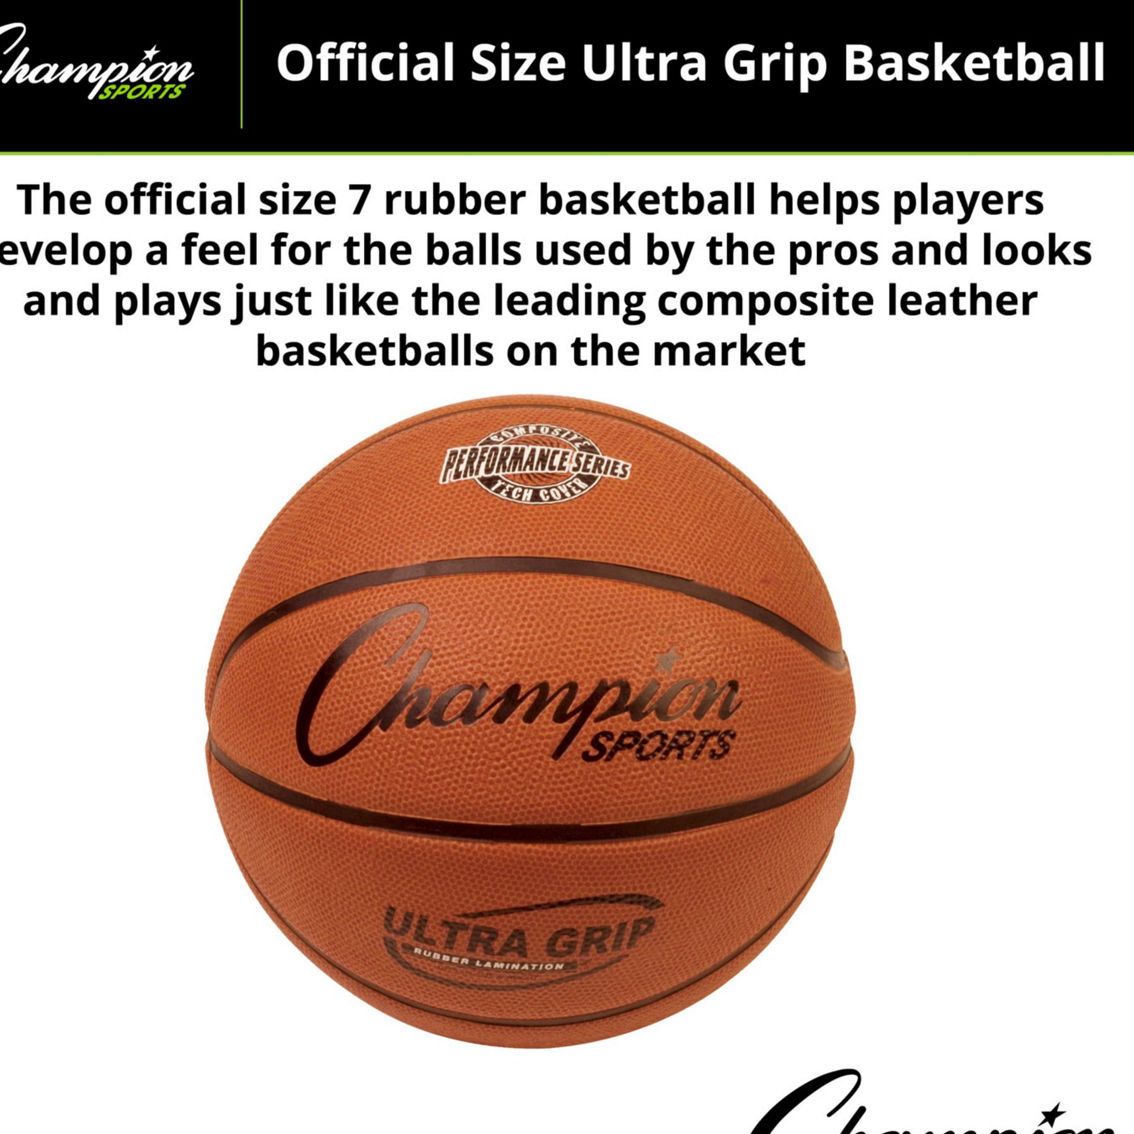 Champion Sports Ultra Grip Rubber Basketball with Bladder, Official Size 7 - Image 4 of 5